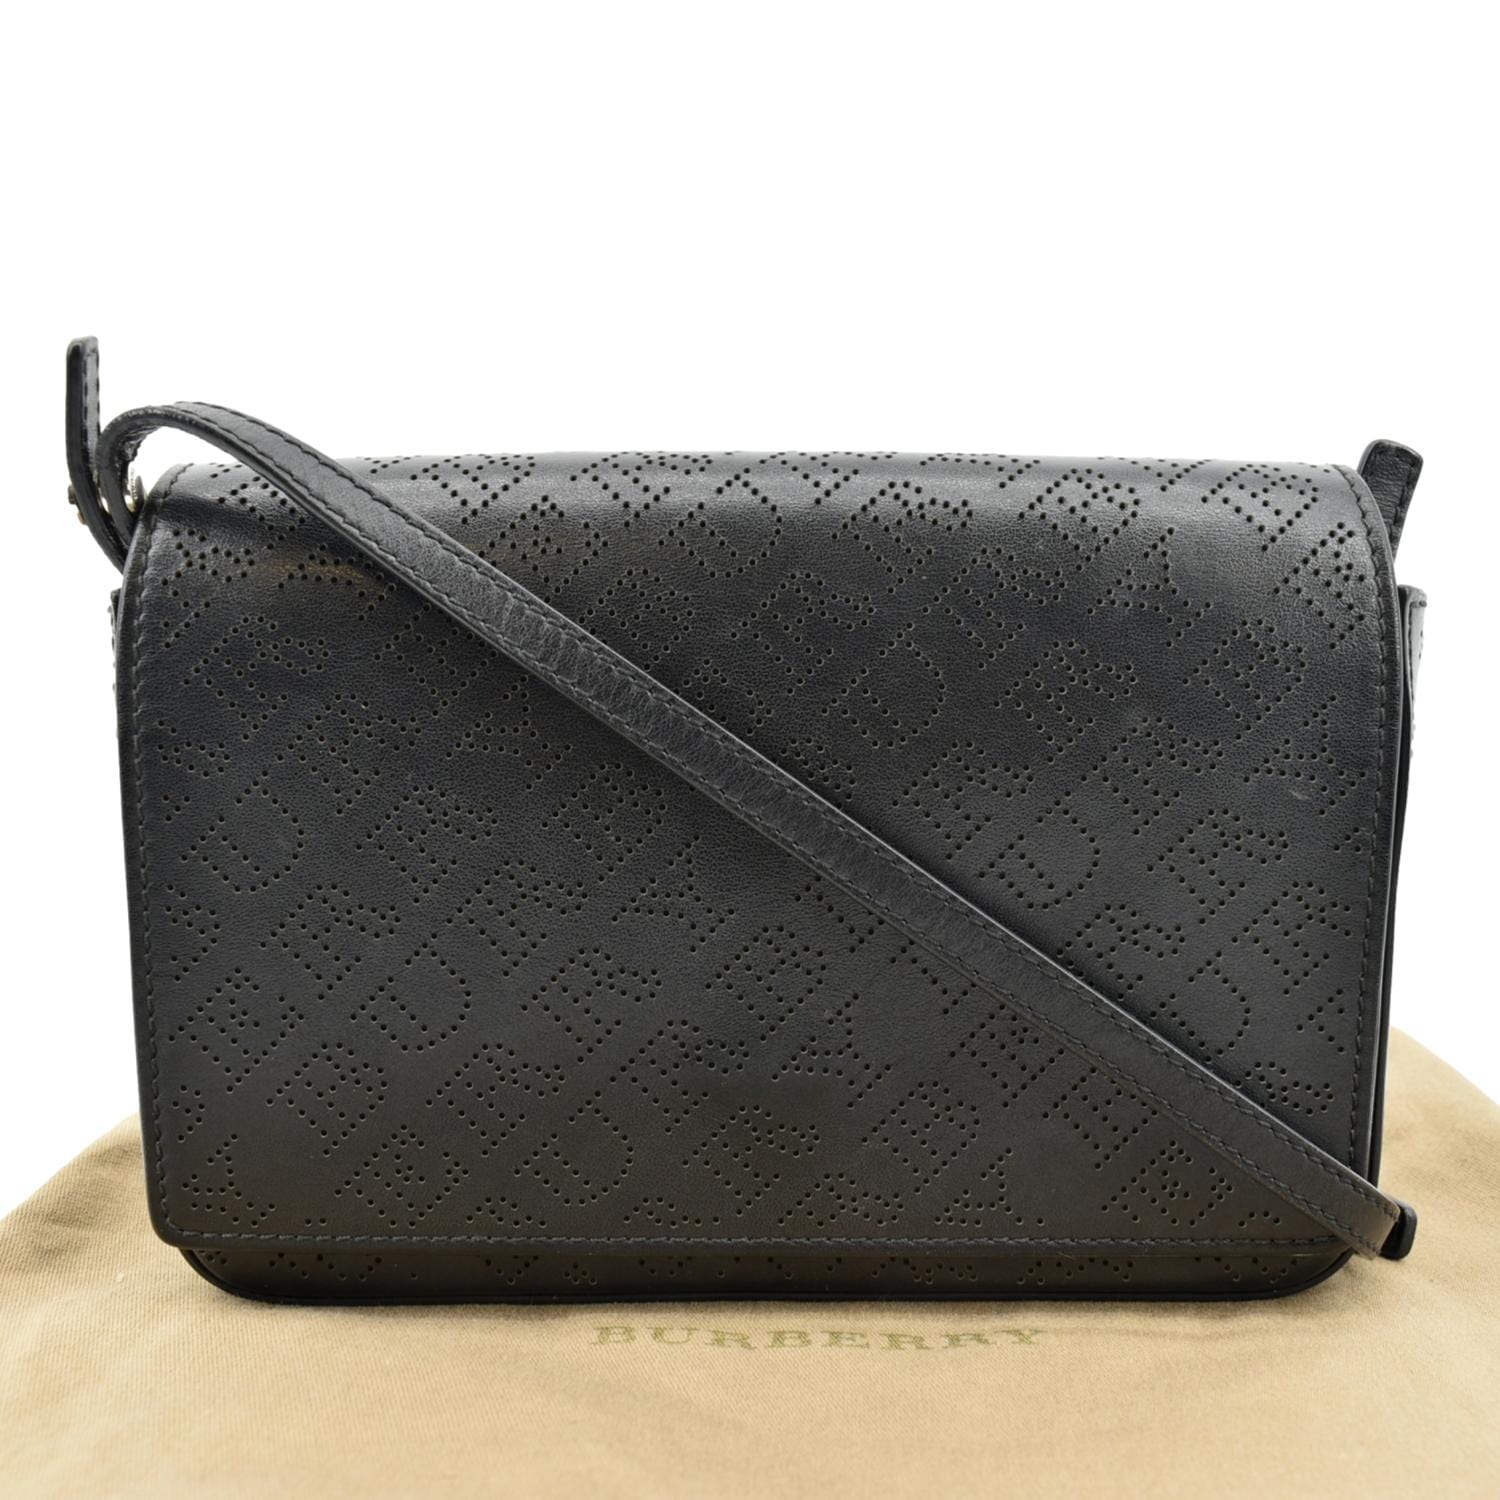 Burberry Hampshire Perforated Leather Crossbody Bag